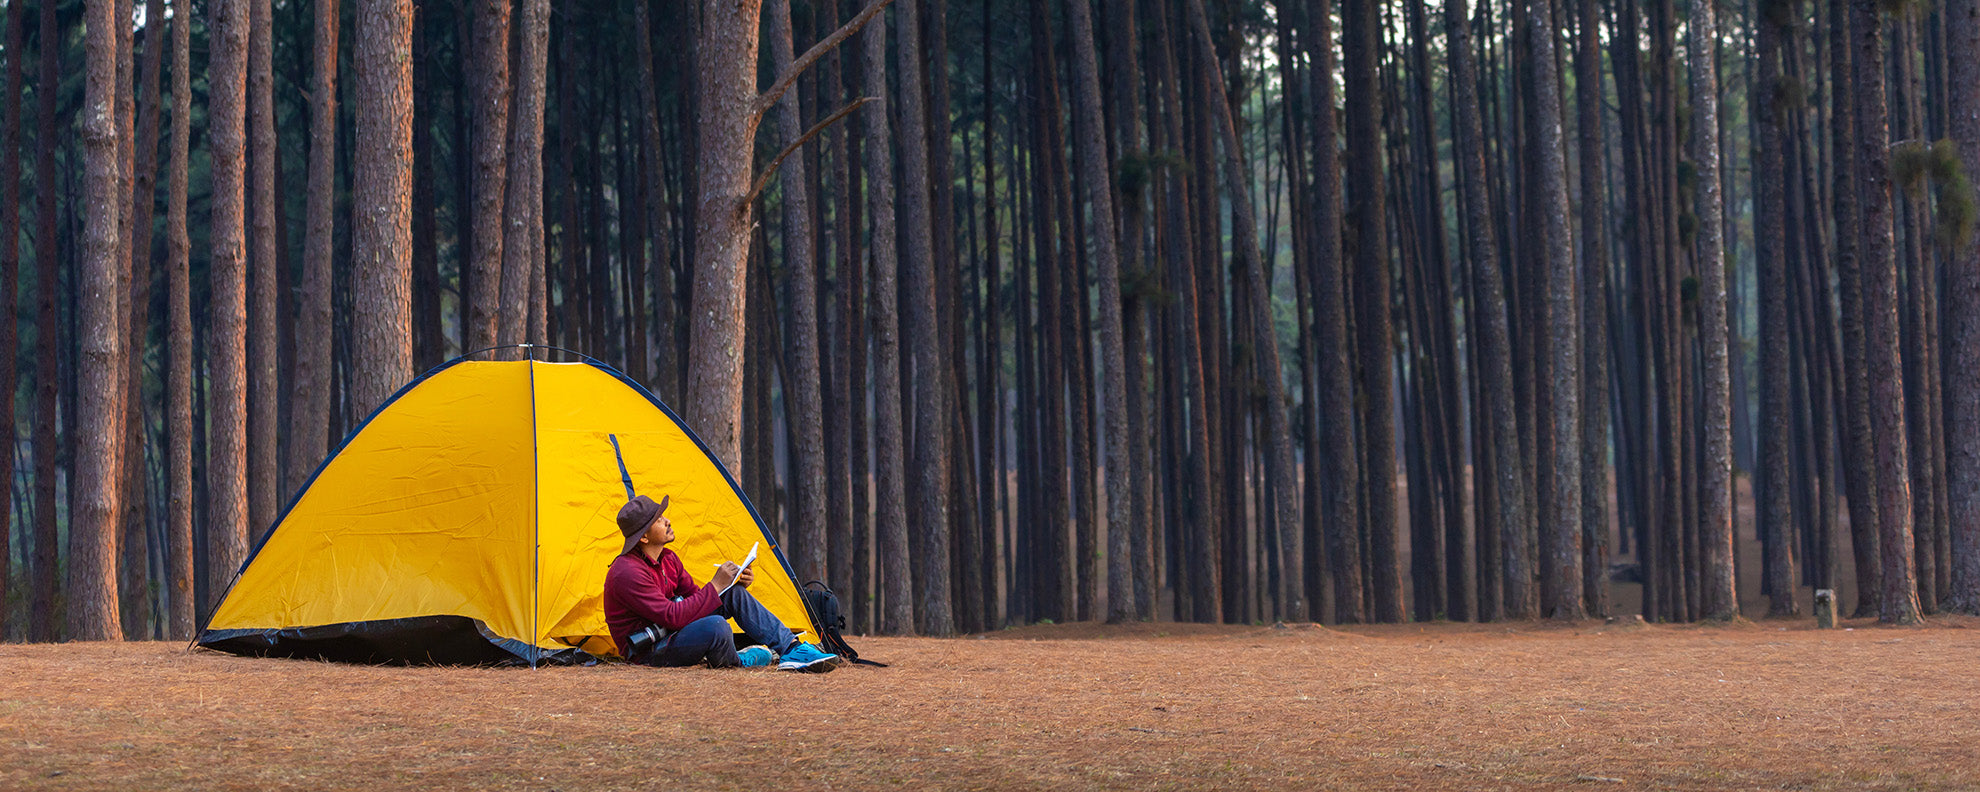 Man sitting in front of a tent in the woods